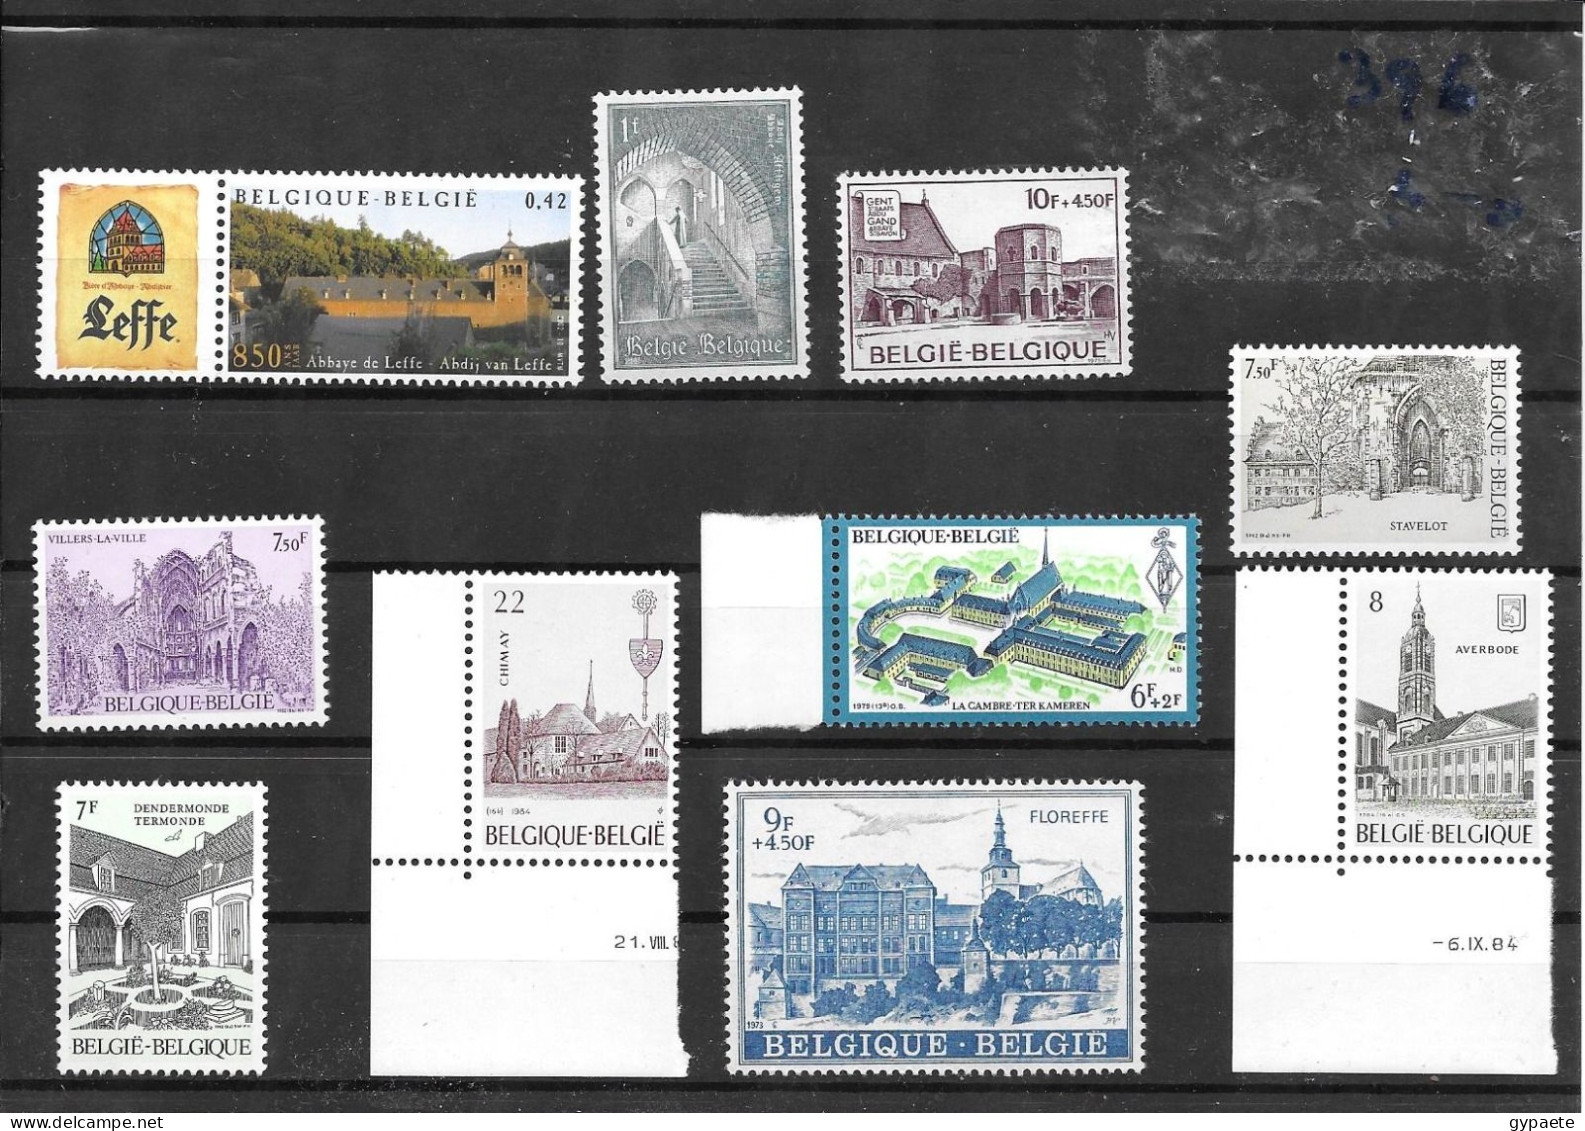 Abbayes Et Monastères - 36 Timbres / Abbeys And Monasteries - 36 Stamps - MNH - Abadías Y Monasterios